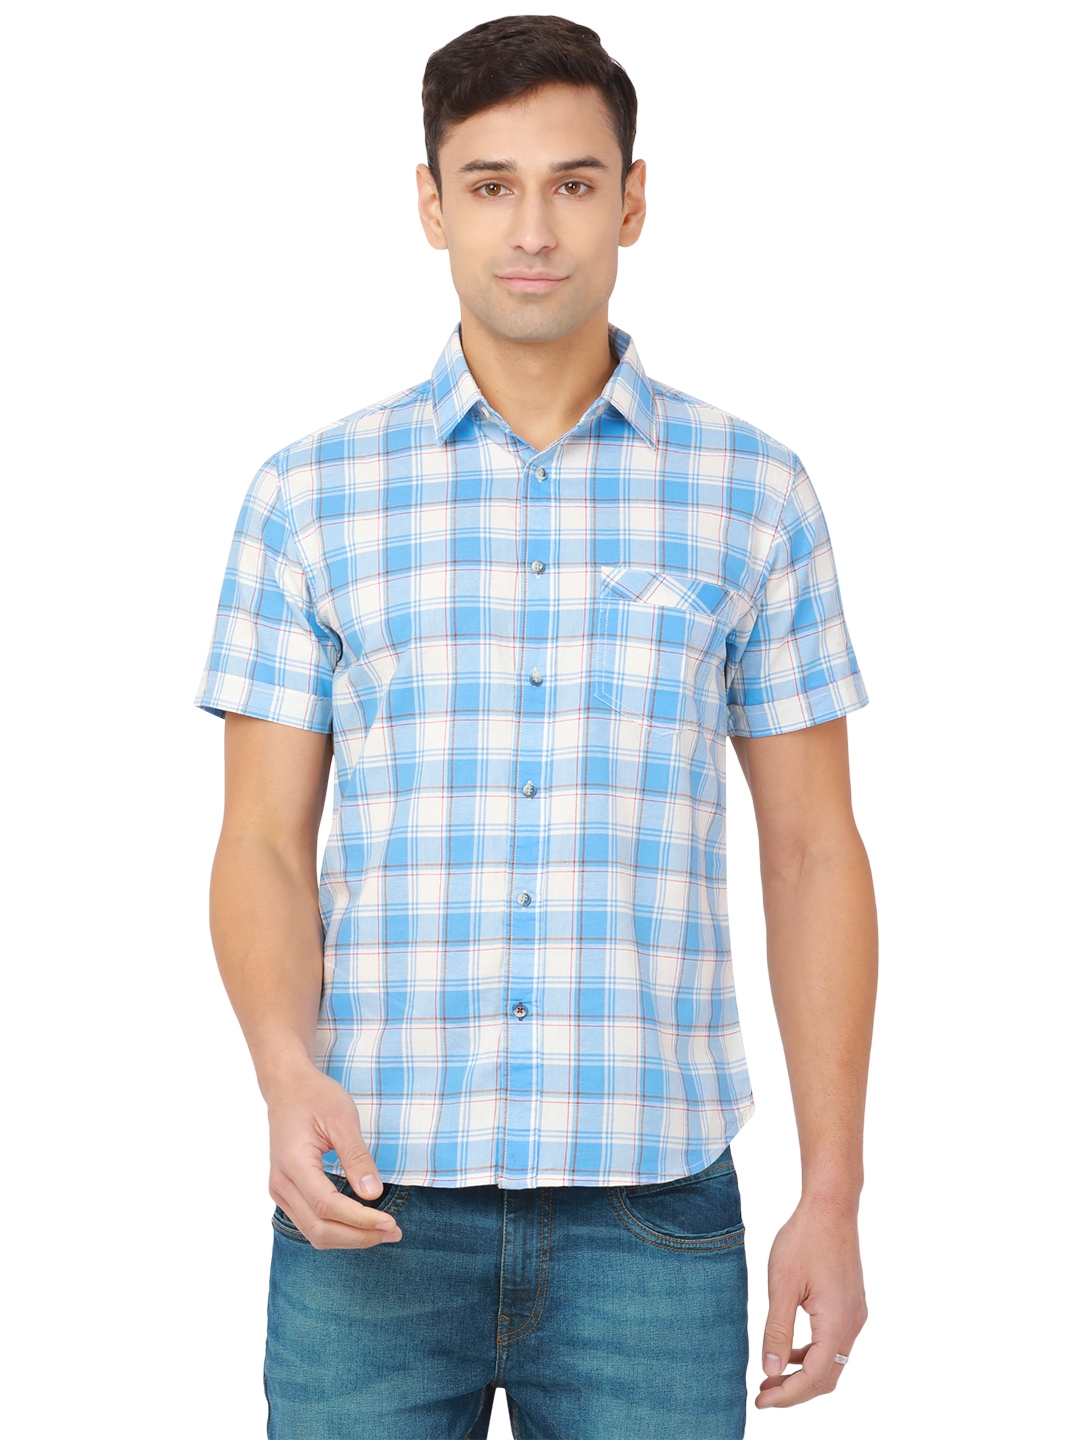 Greenfibre | White & Azure Blue Checked Slim Fit Semi Casual Shirt | Greenfibre